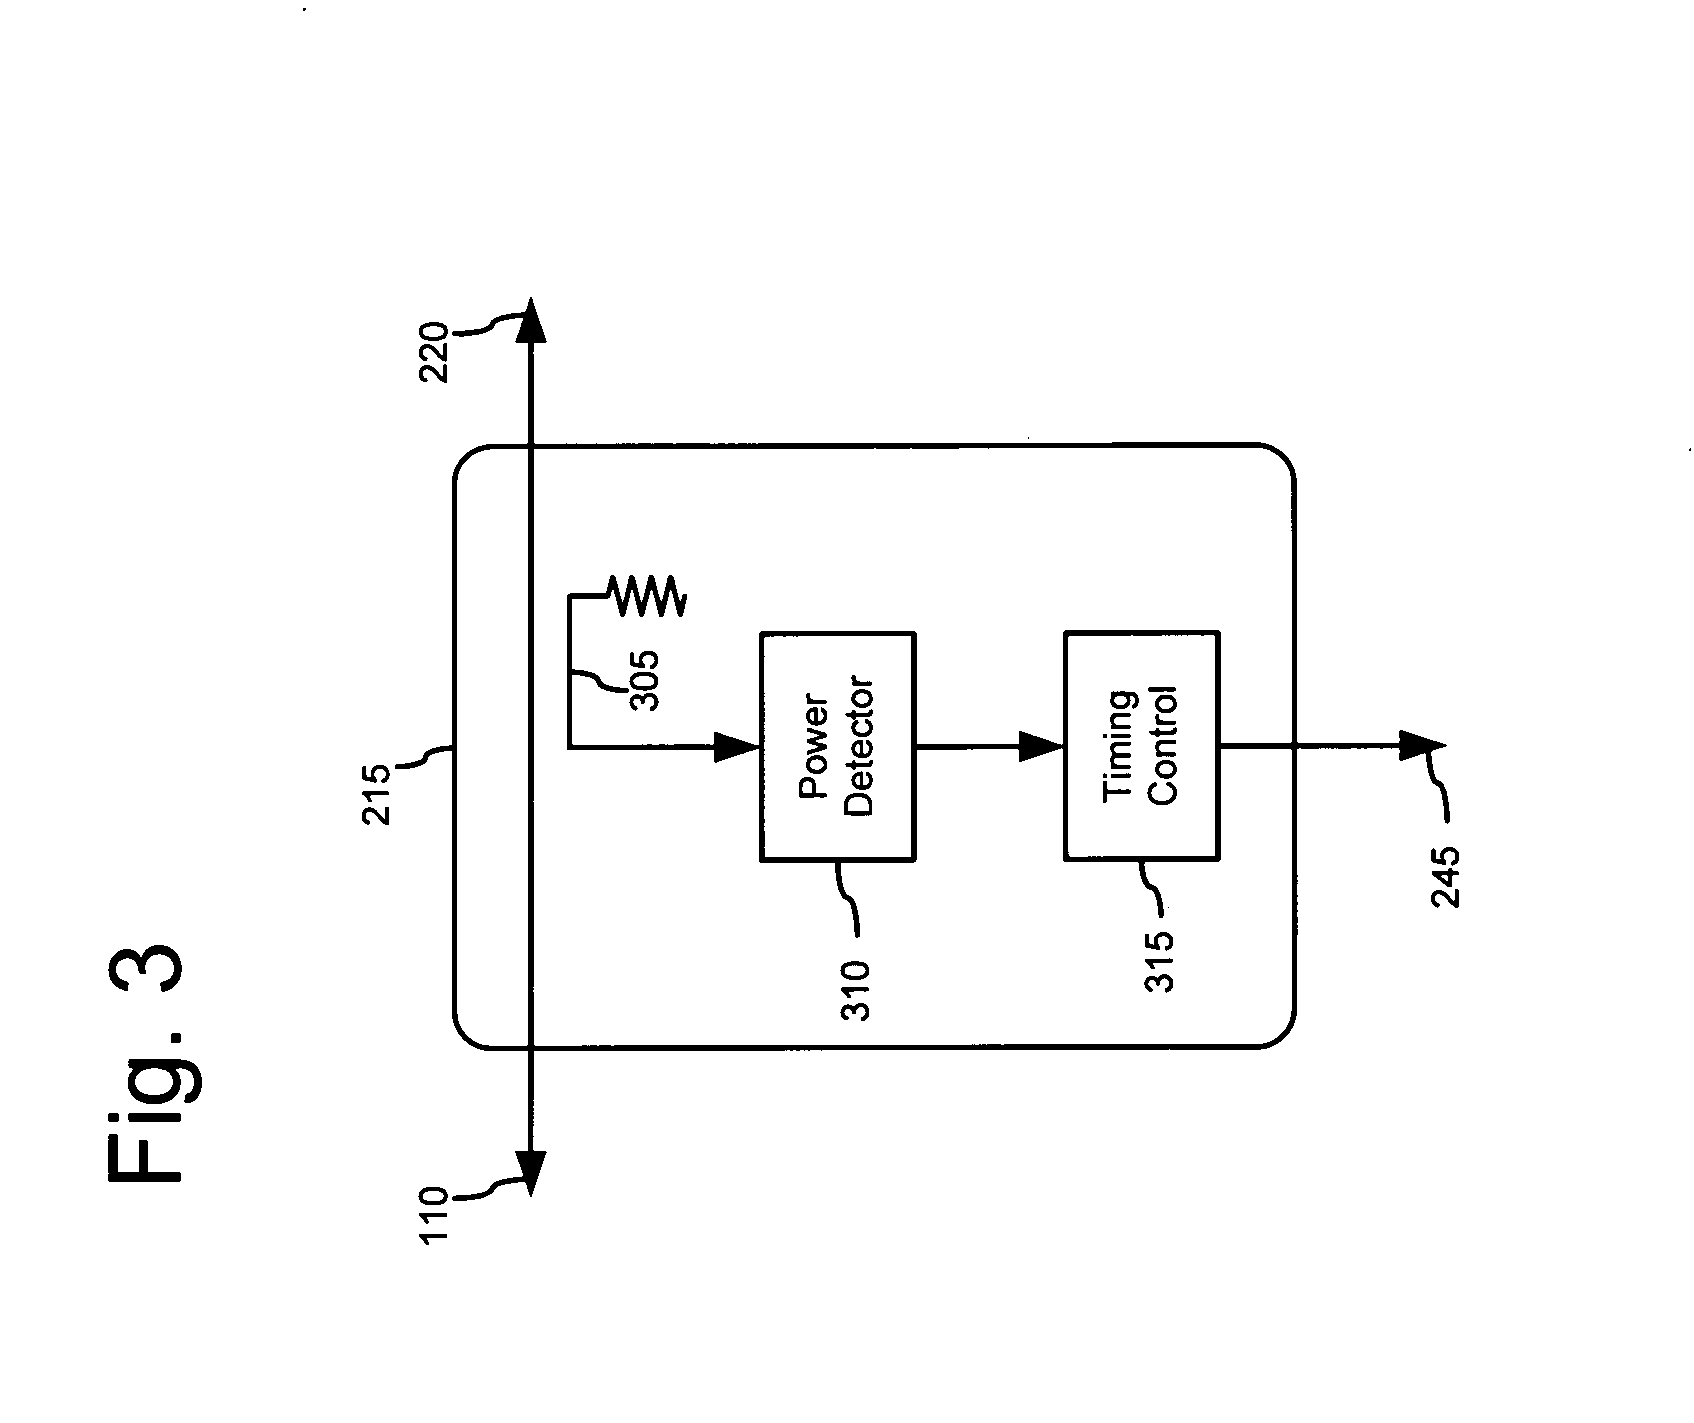 Time division duplex forward-to-reverse transition signal generator